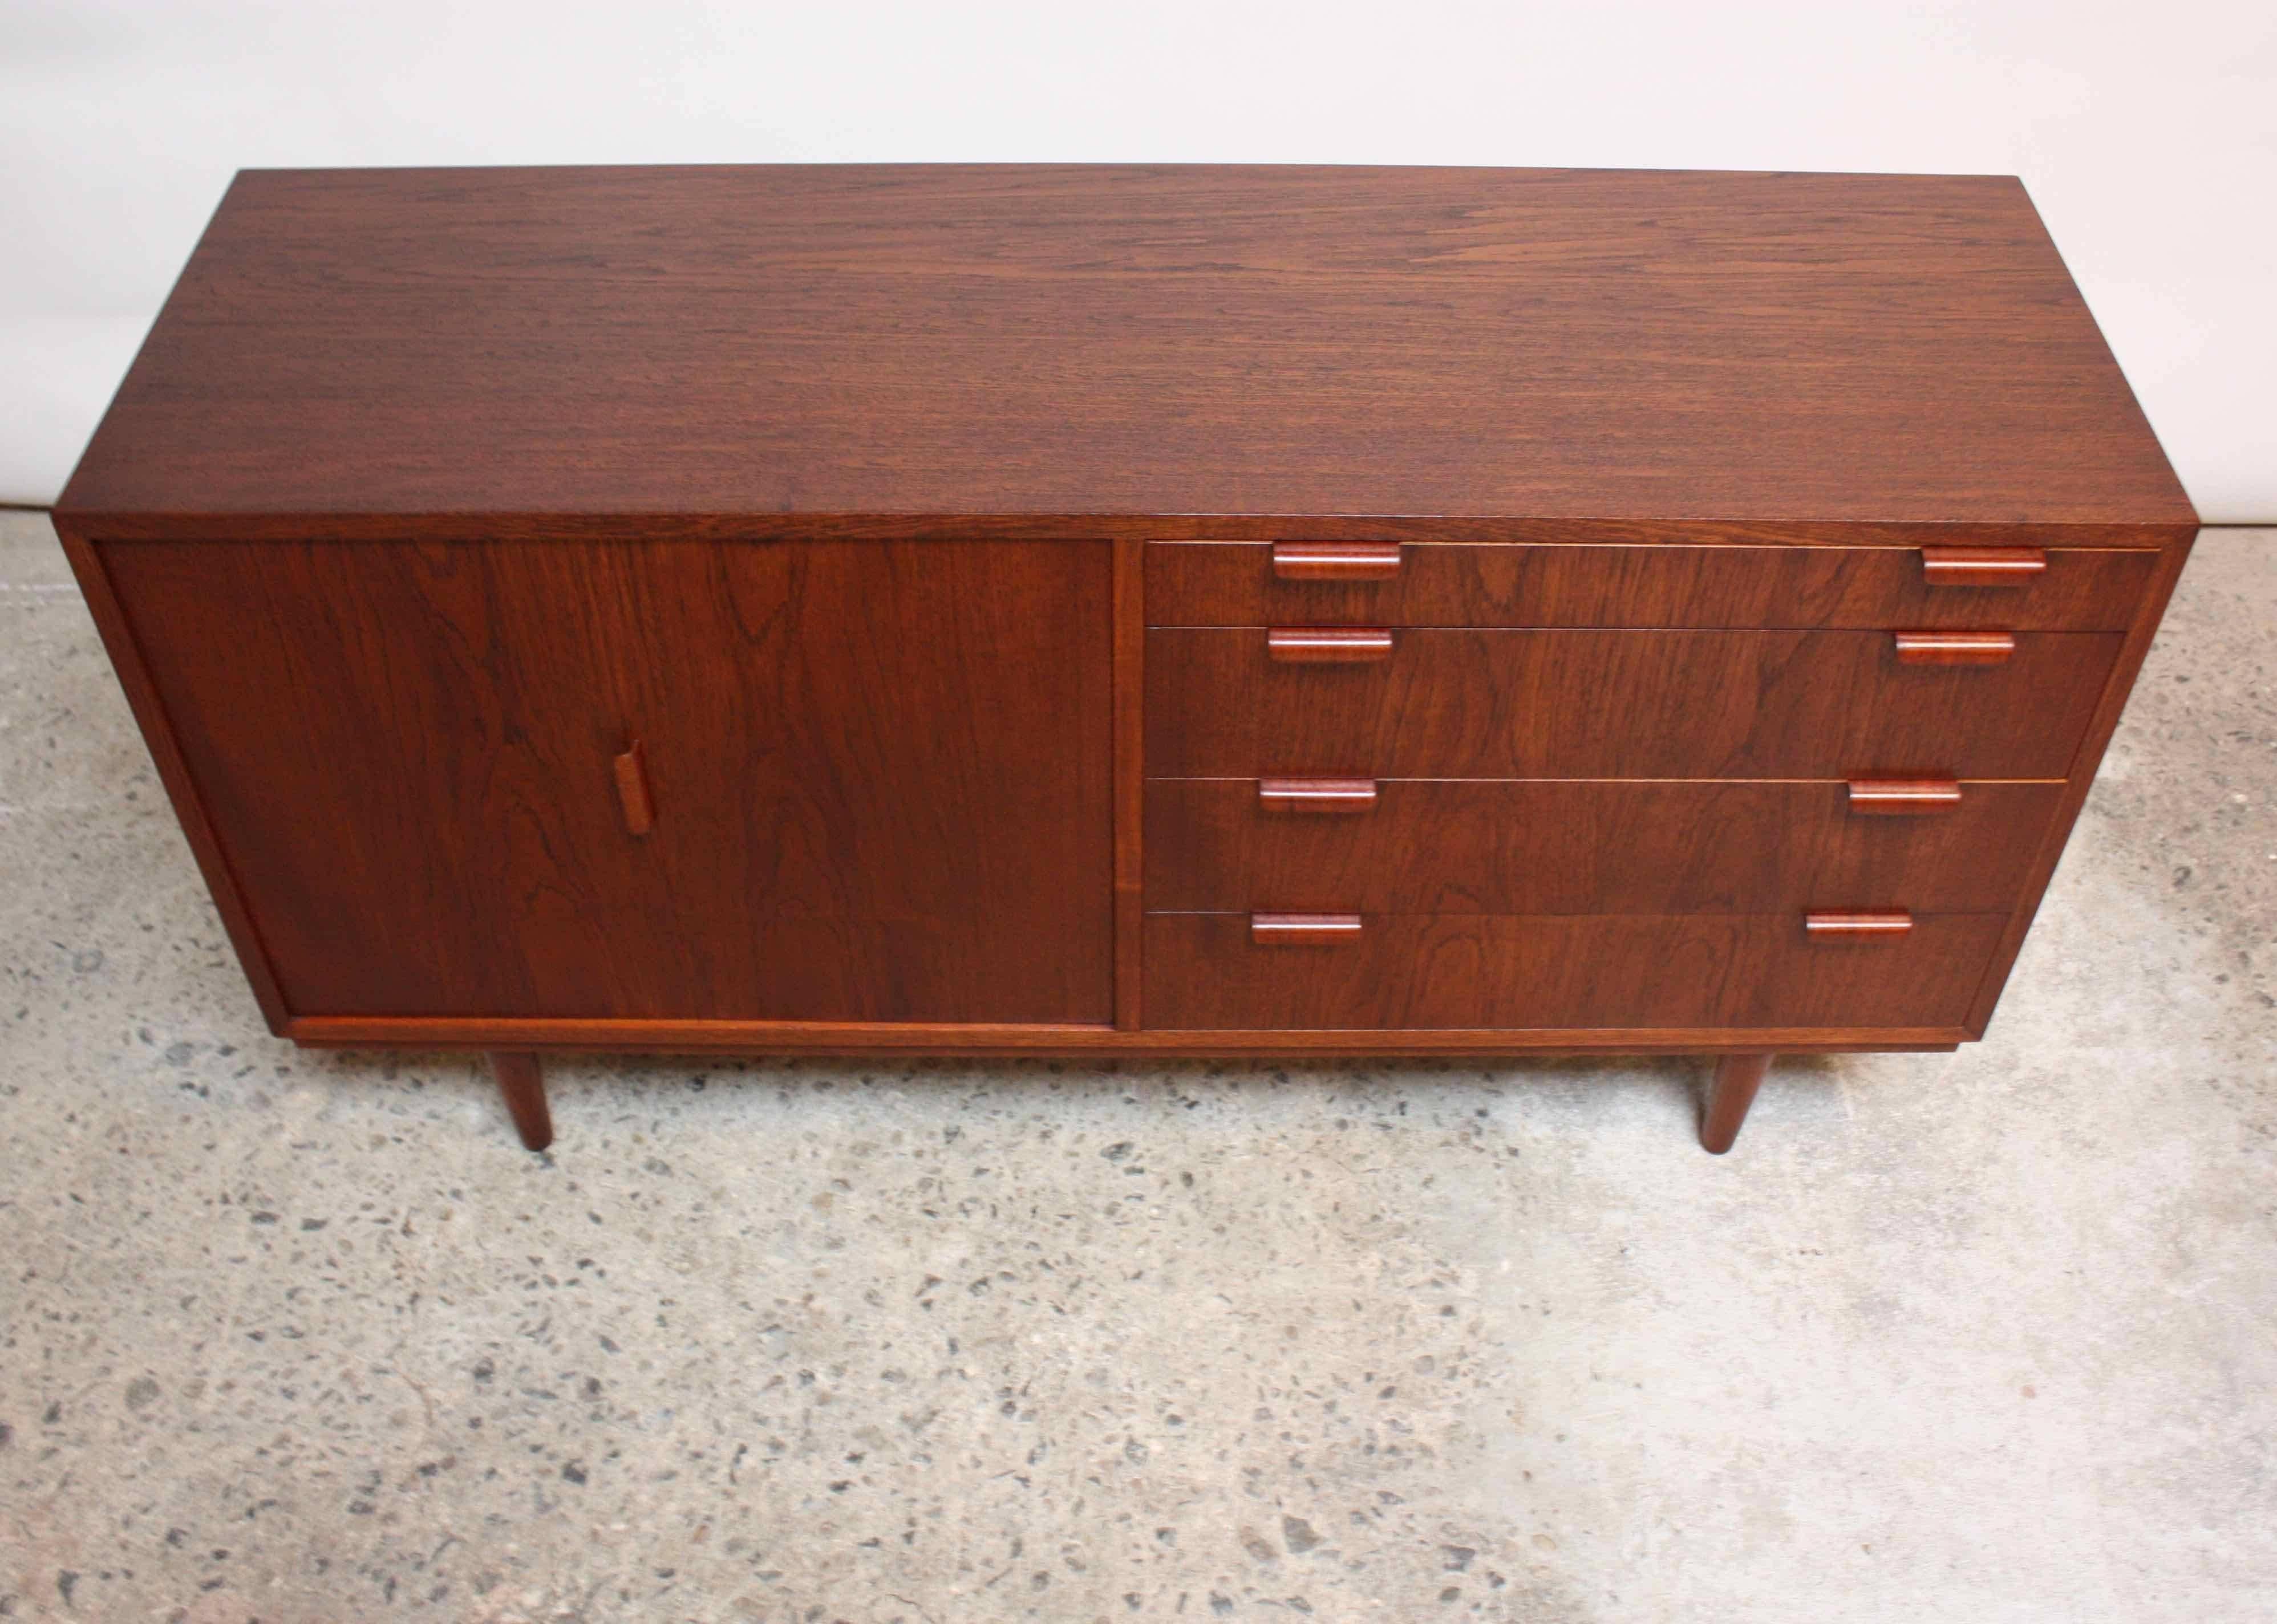 This Danish teak sideboard/cabinet was designed in the 1950s by Carlo Jensen for Poul Hundevad. This small cabinet features a bi-fold door on the left side which opens to reveal a single, adjustable shelf. There are four drawers on the right side